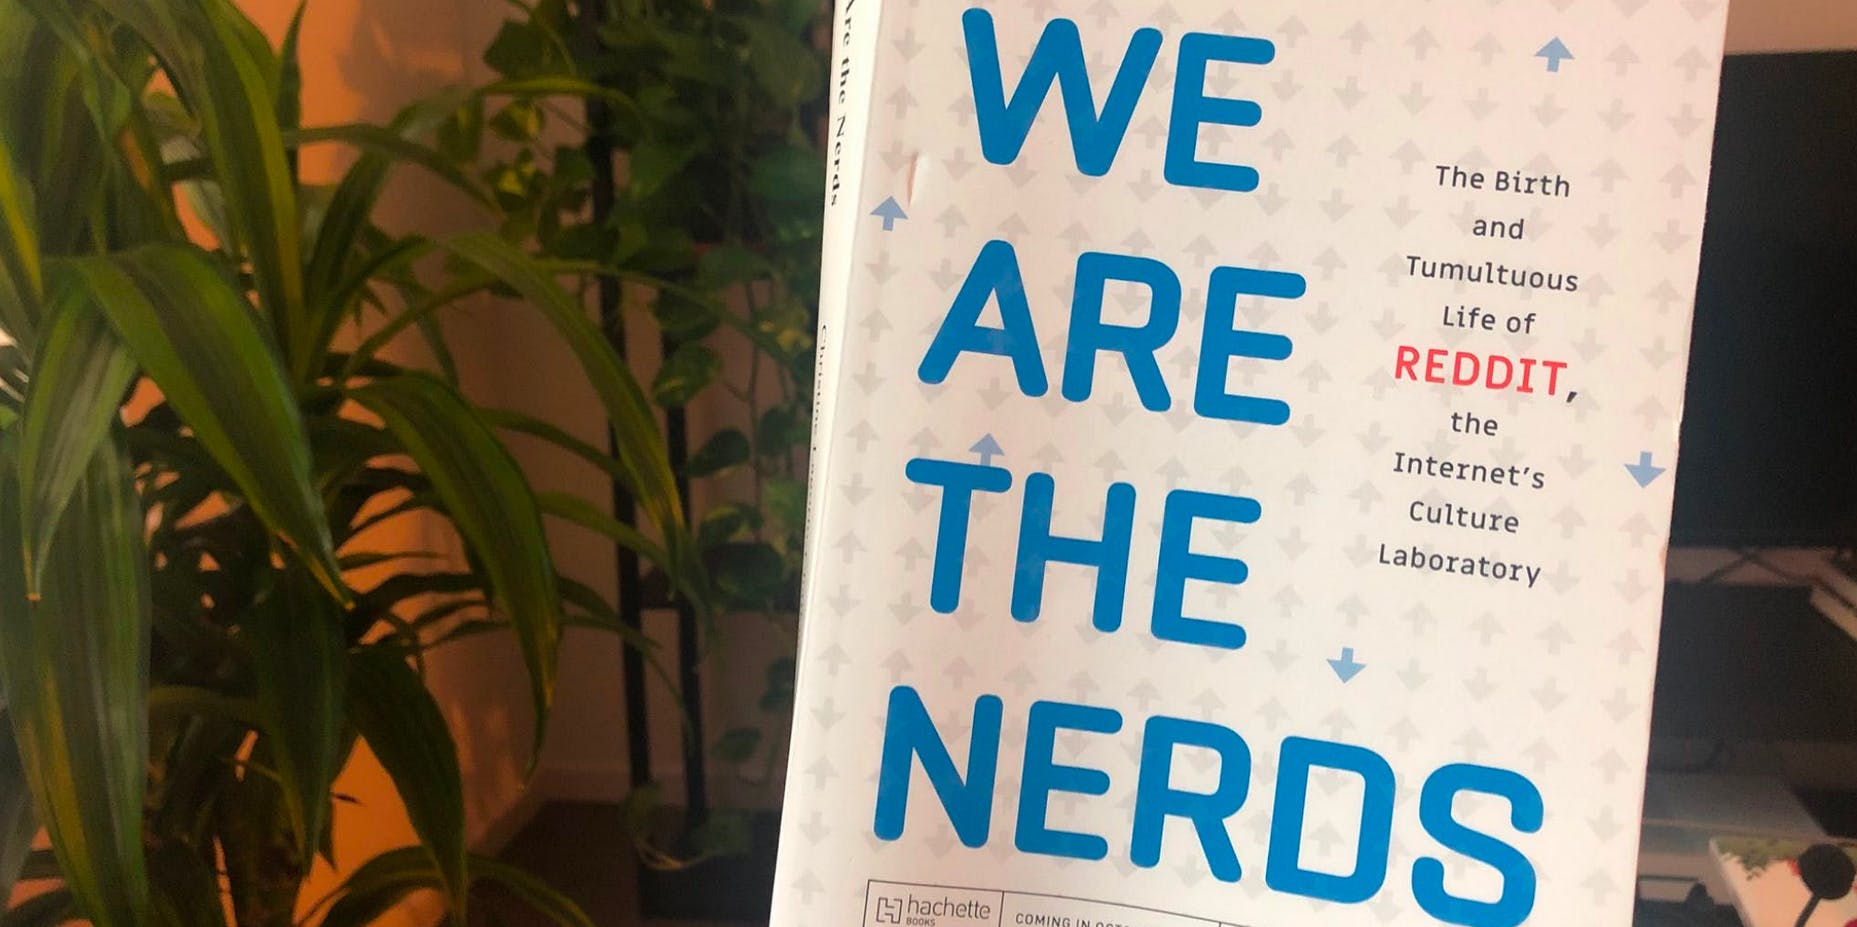 WE ARE THE NERDS